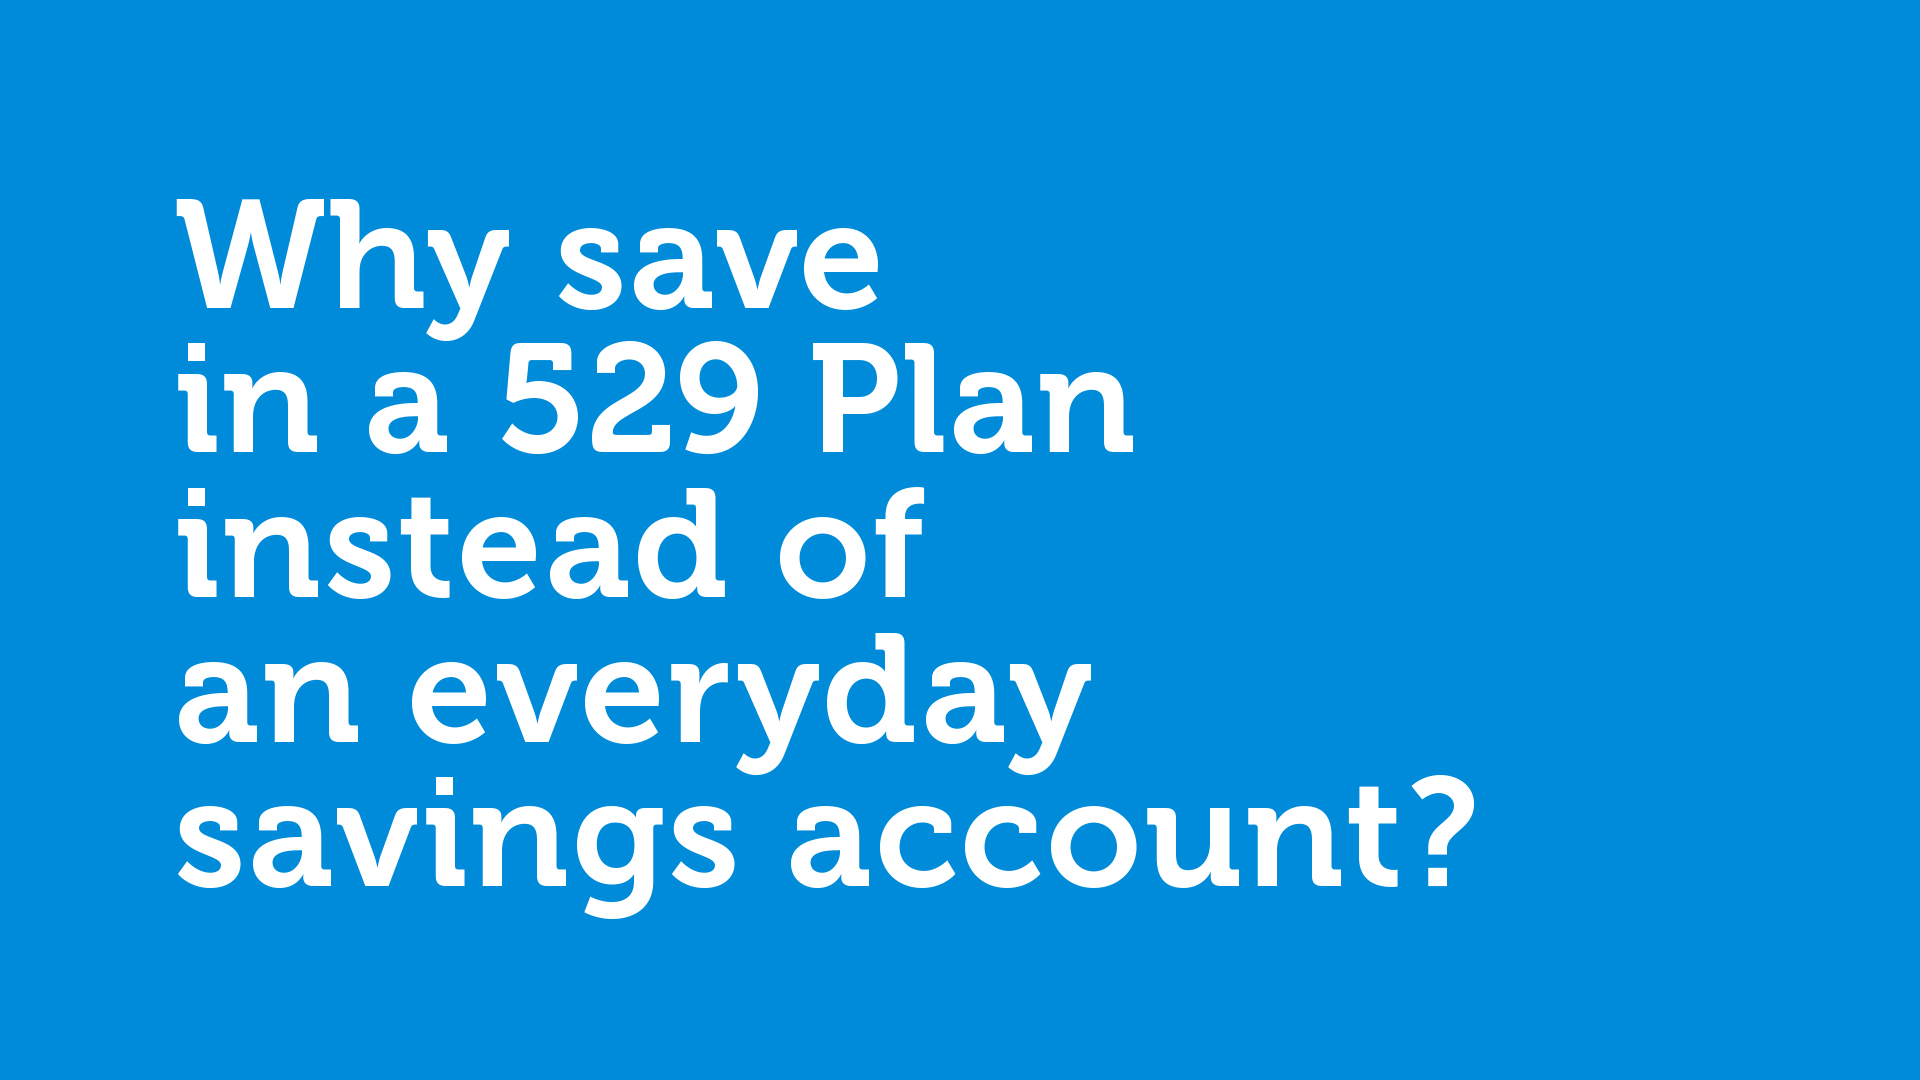 Key frame of video with title Why save in a 529 Plan instead of an everyday savings account?